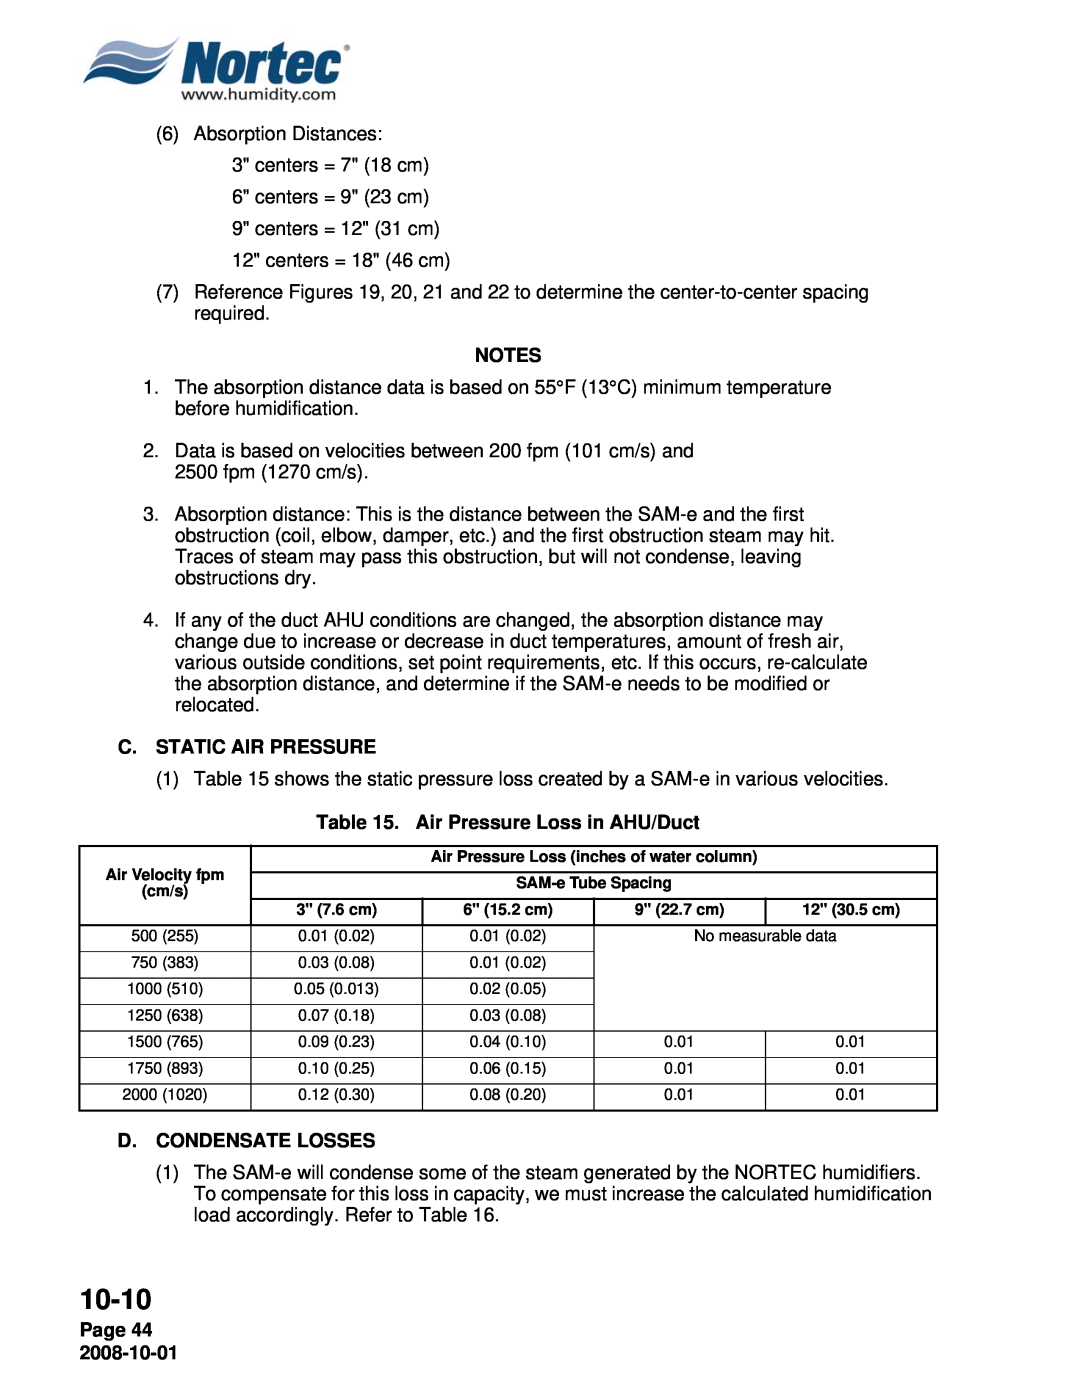 Nortec NHPC, NHTC manual 10-10, Notes, C.Static Air Pressure, Air Pressure Loss in AHU/Duct, D.Condensate Losses, Page 44 